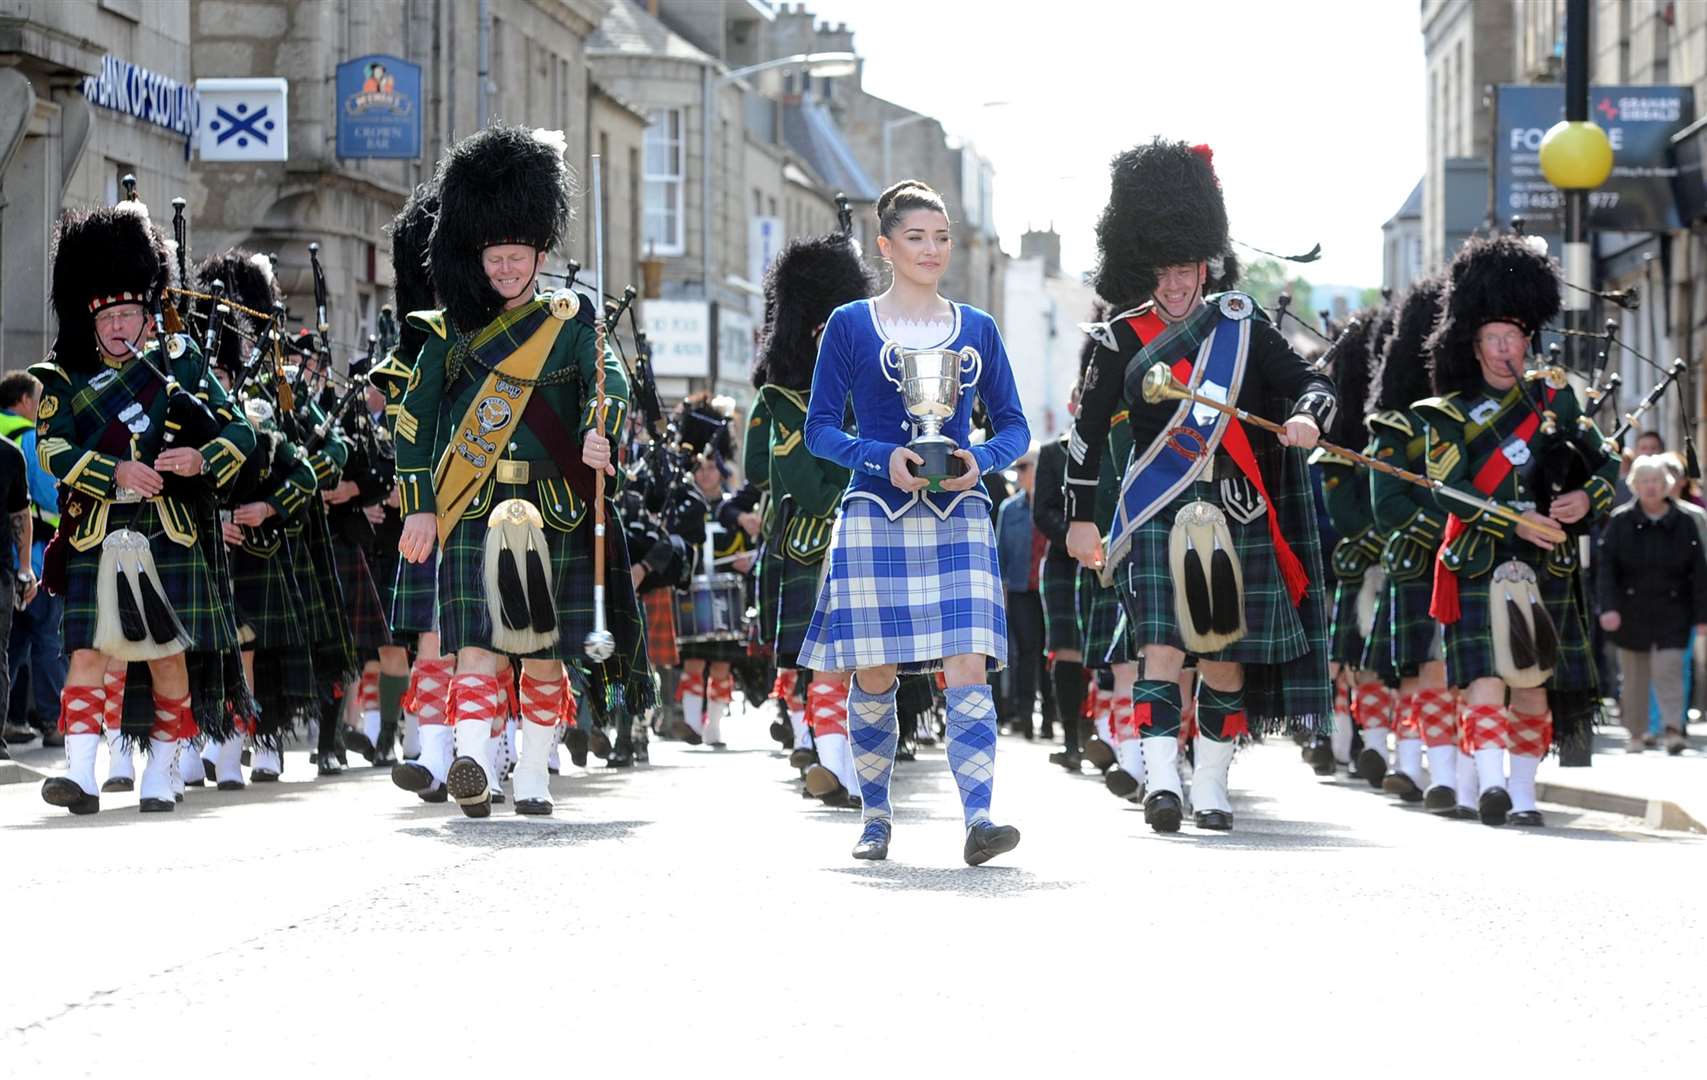 Recently crowned as world champion in 2018, Michelle Gordon led the parade by Huntly Pipe Band to mark their 70th anniversary.